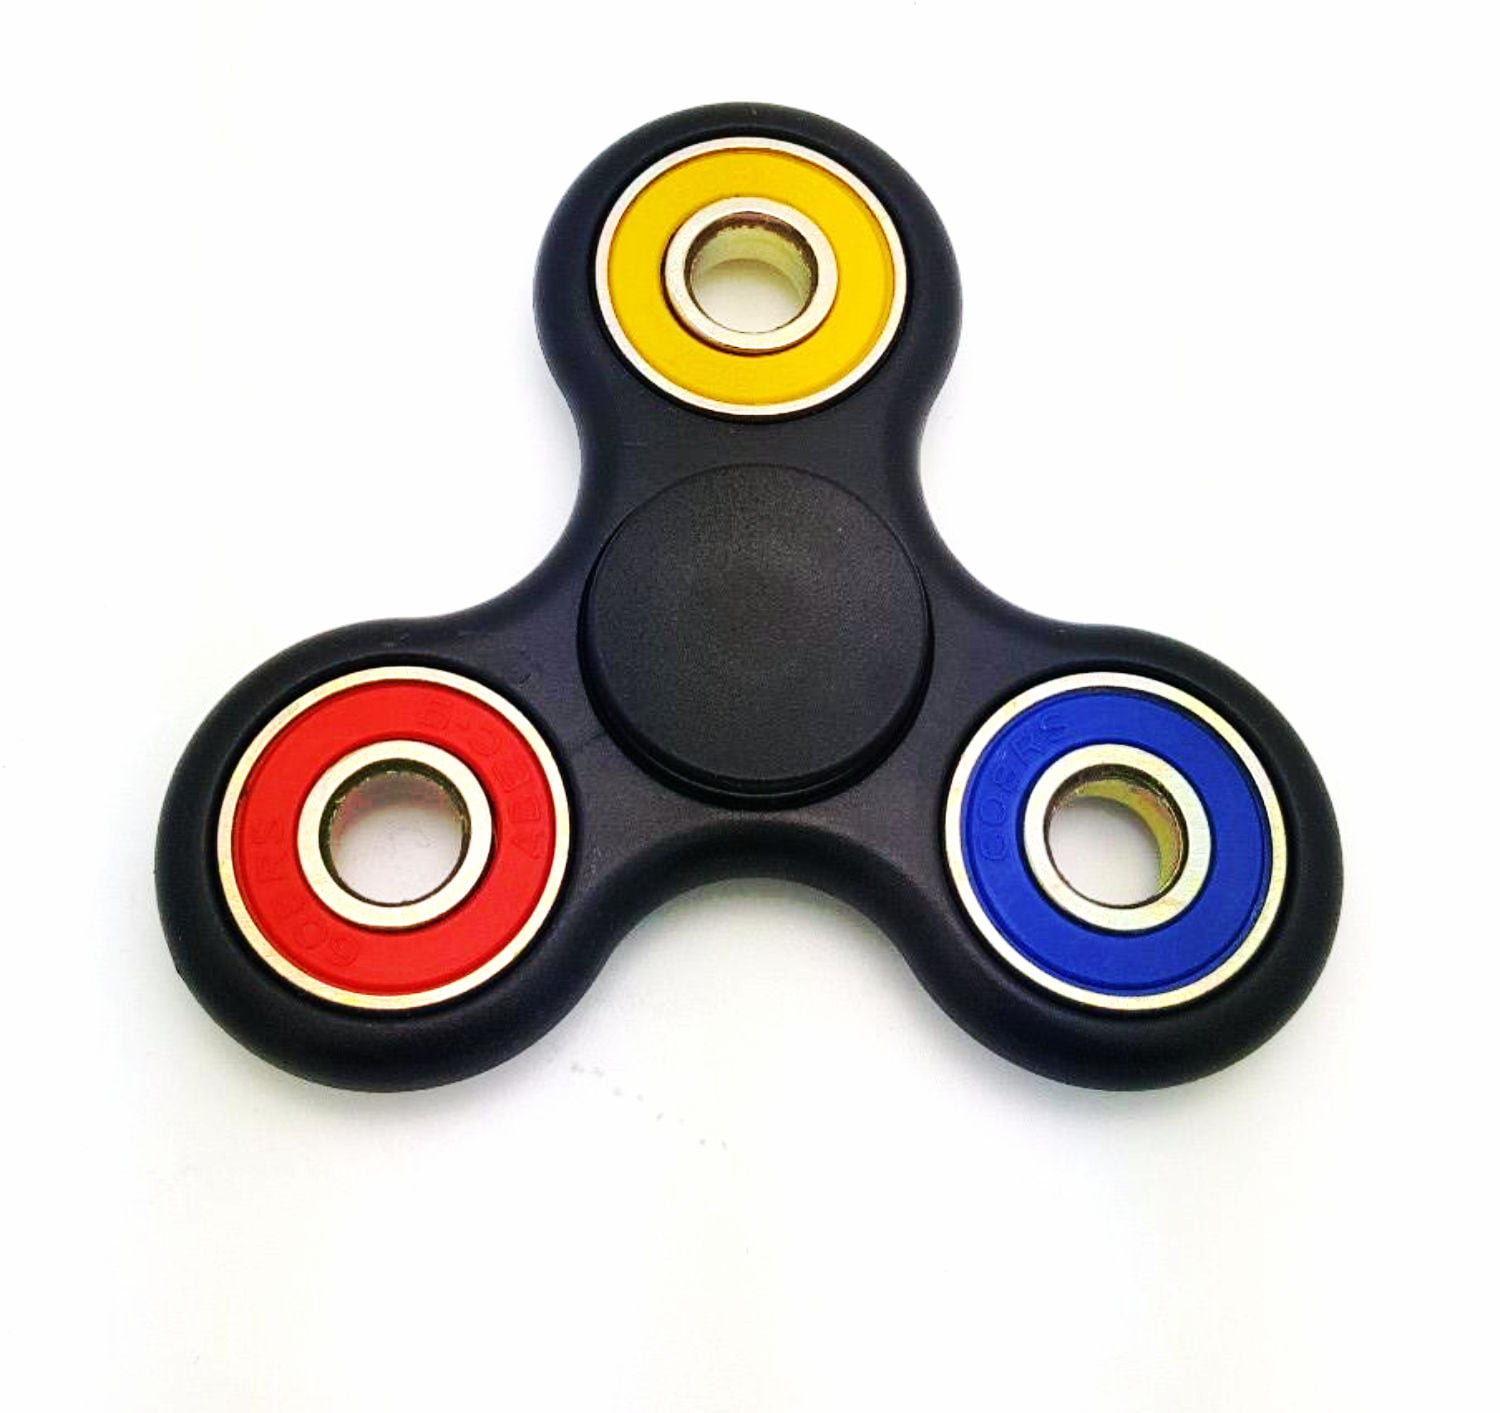 Details about   1Pc Creative Plastic Hand Tri-Spinner Fidget Toy for Autism Reliever Green 